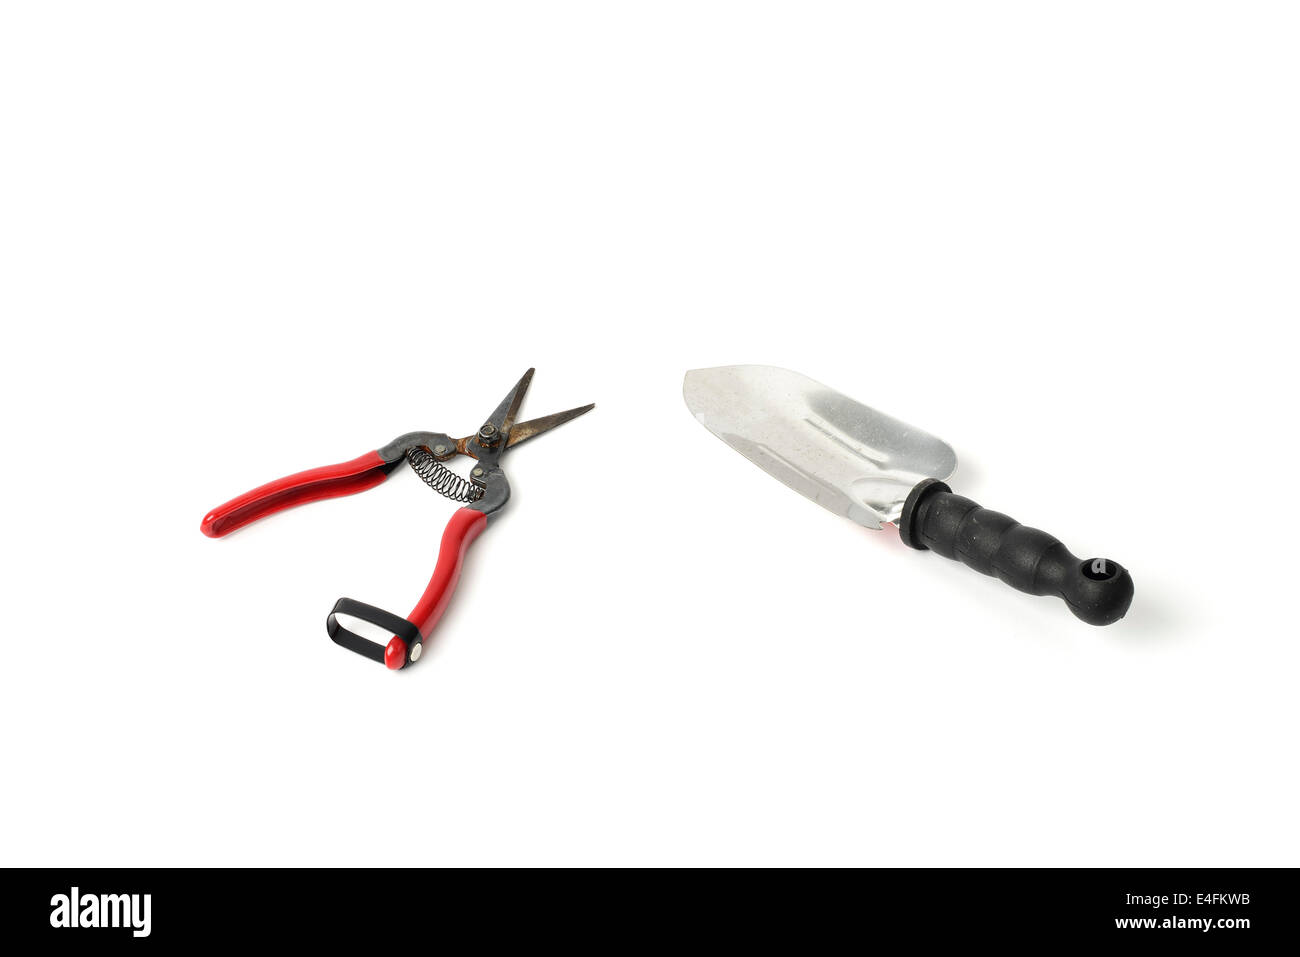 trowel and scissor for gardening, isolated on white background Stock Photo